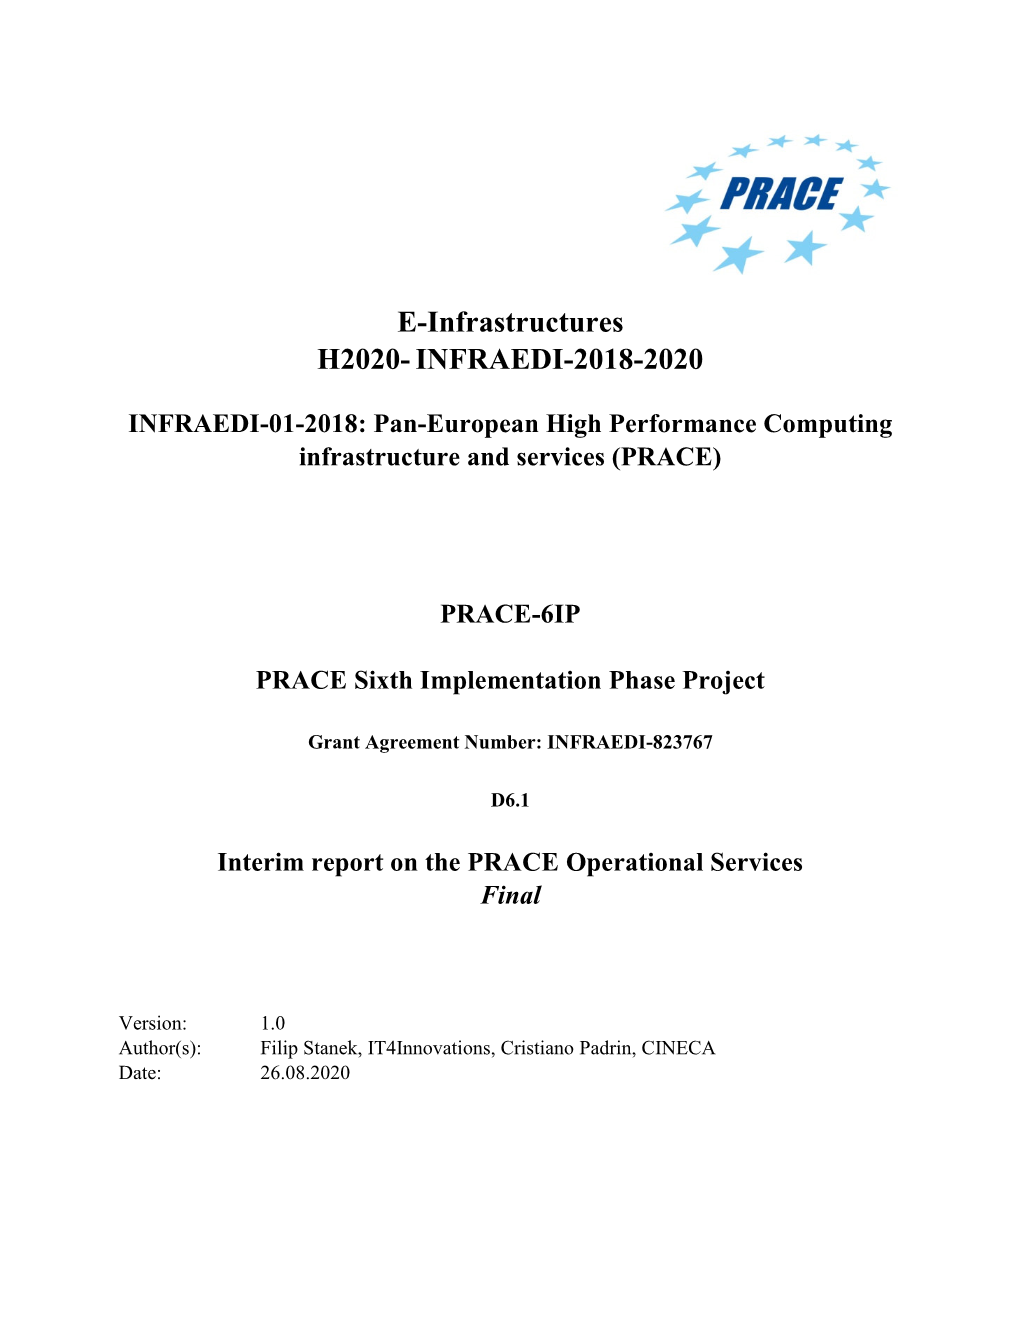 Interim Report on the PRACE Operational Services Final